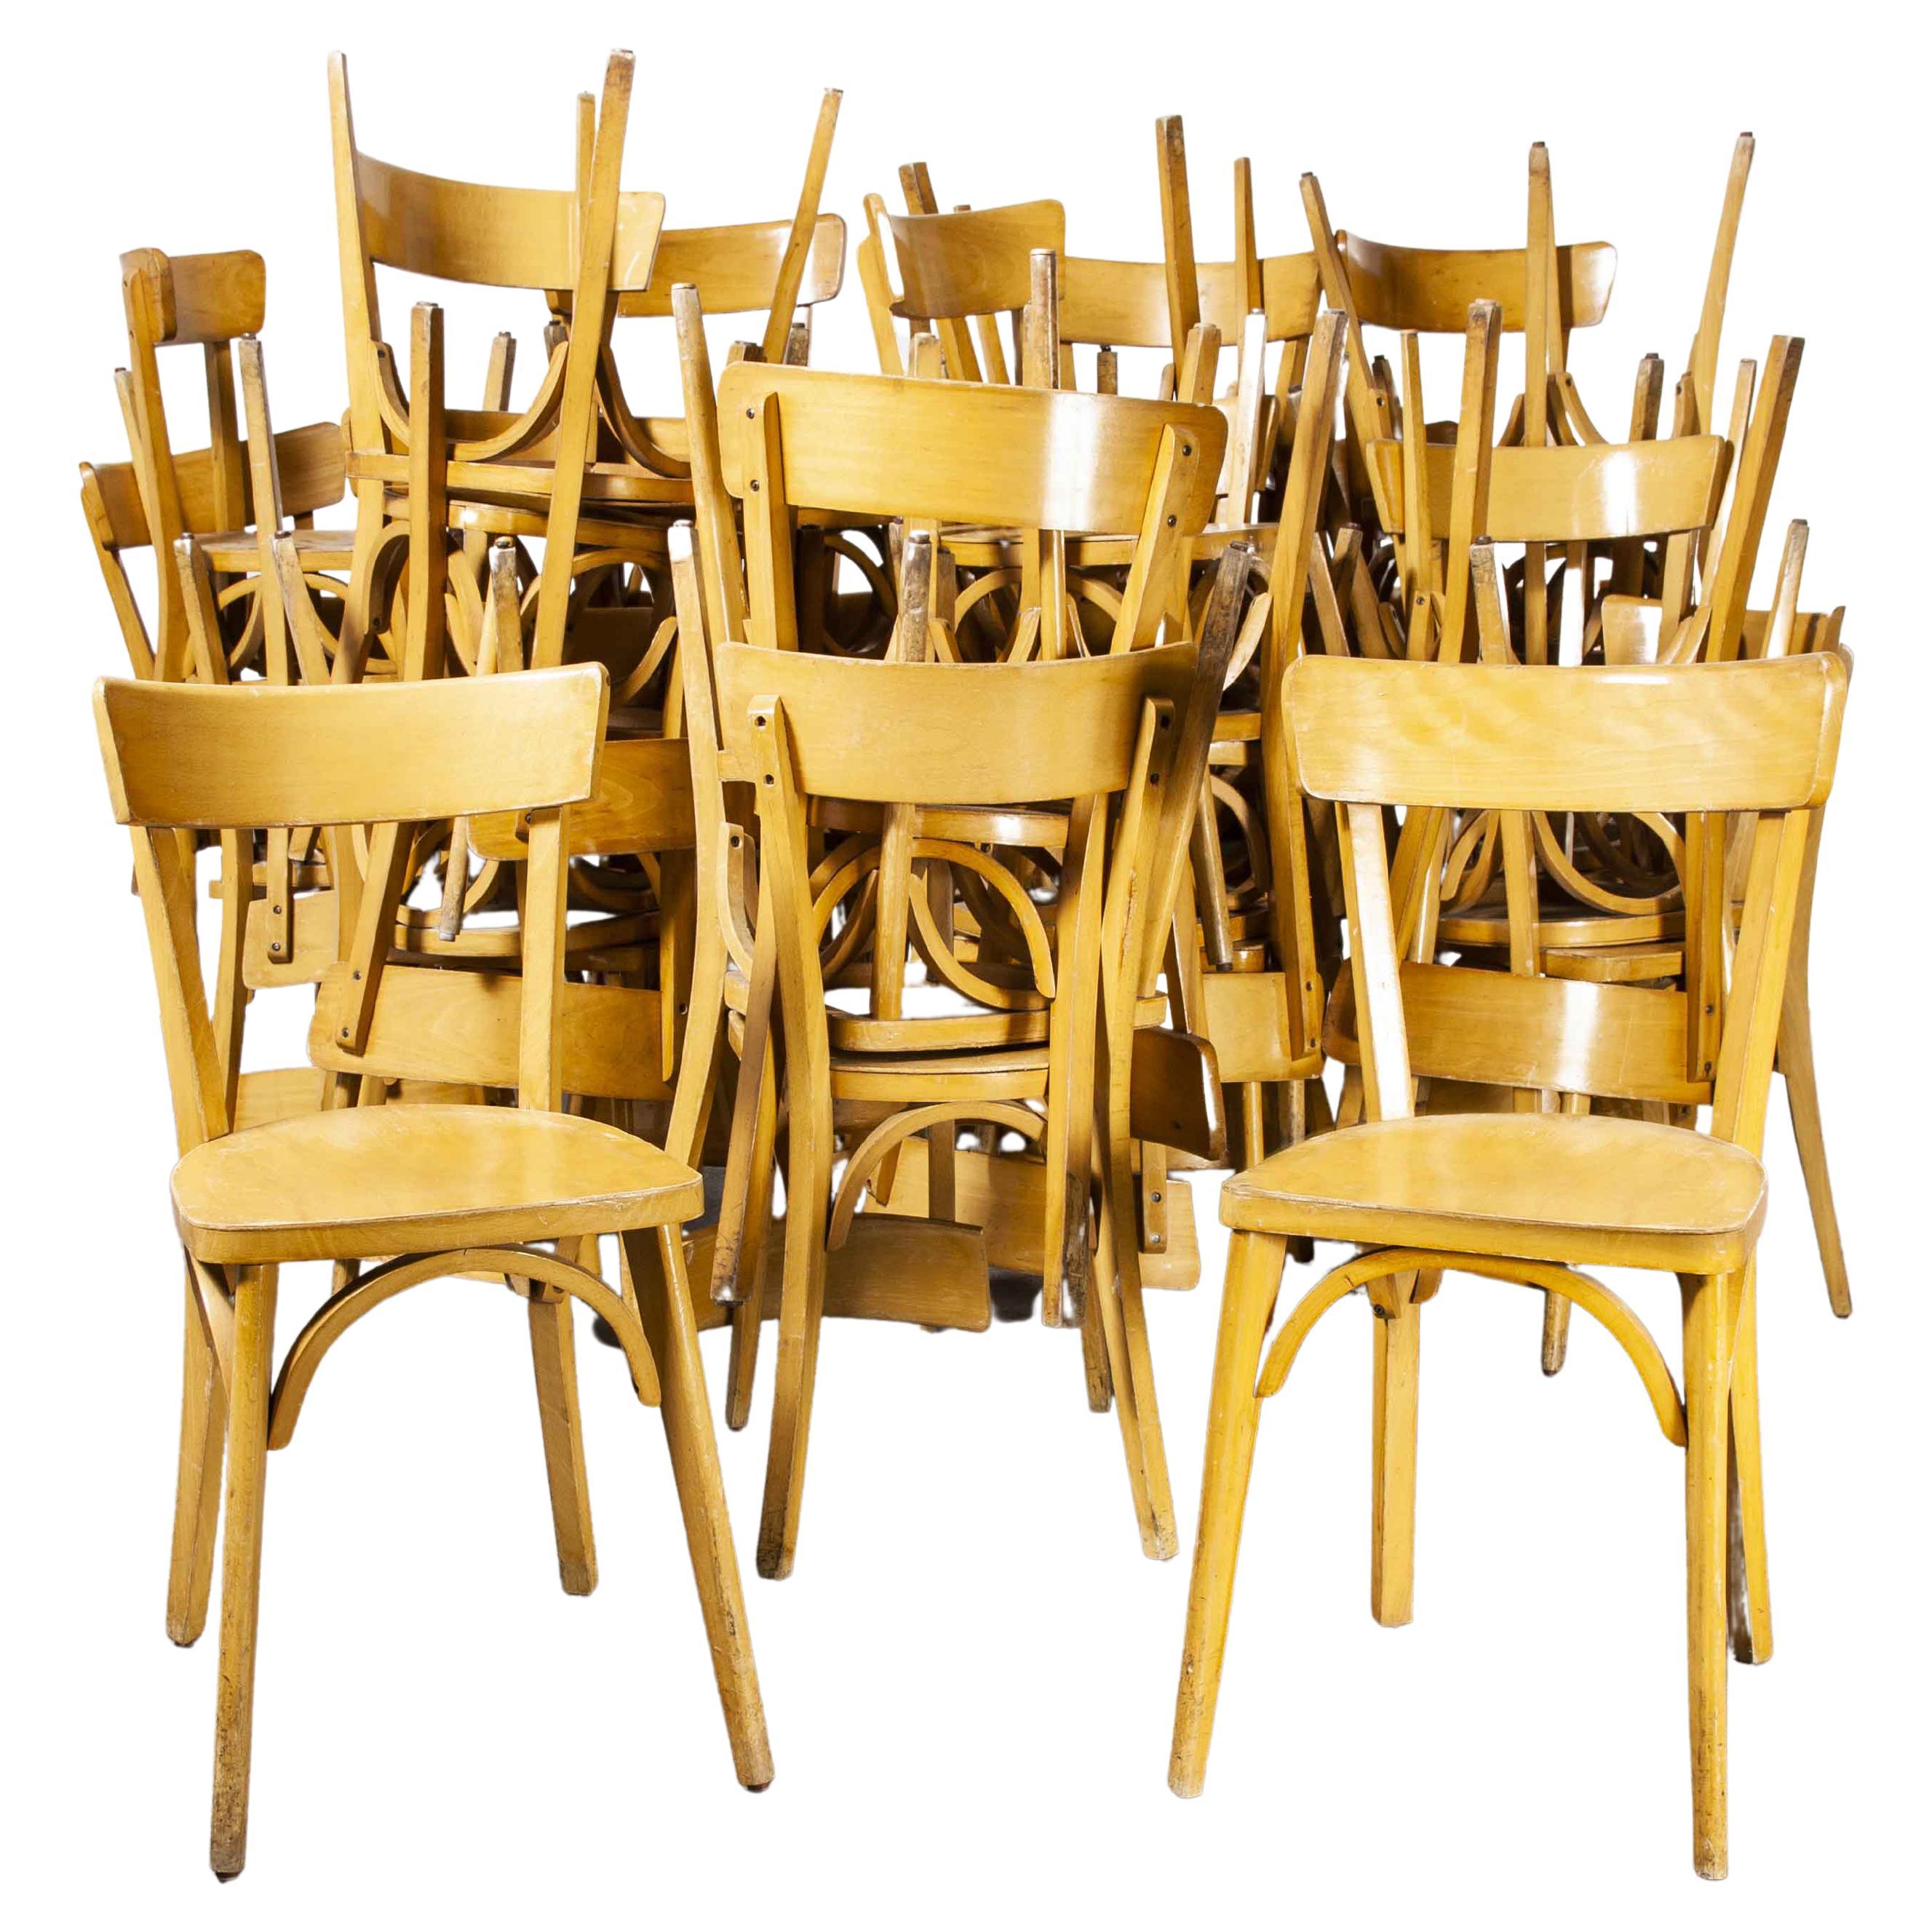 1950's French Made Luterma Bentwood Dining Chairs, Various Qty Available For Sale